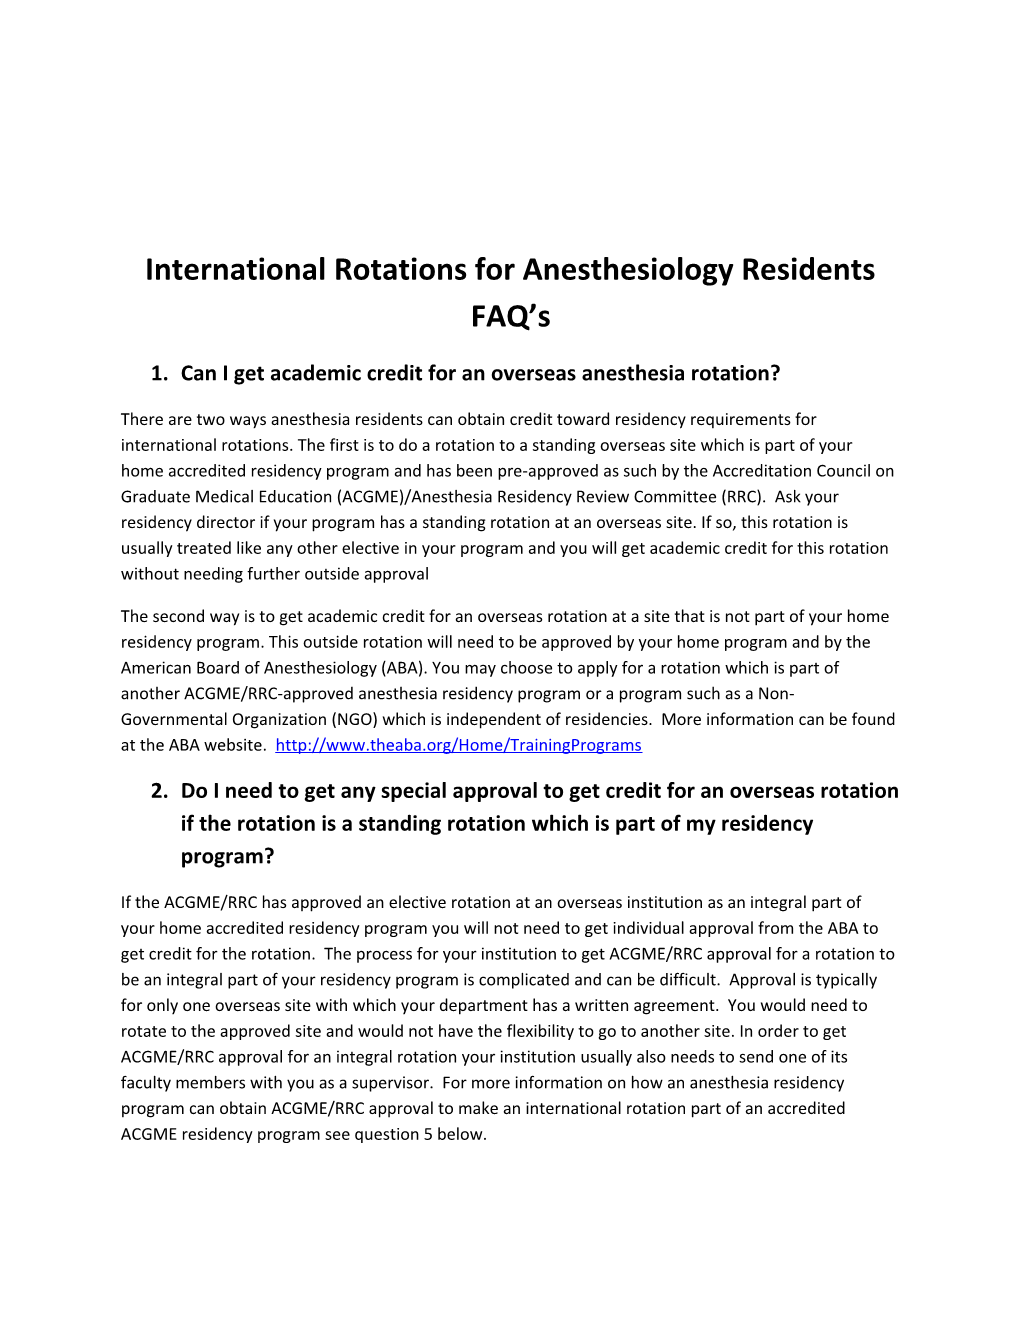 International Rotations for Anesthesiology Residentsfaq S